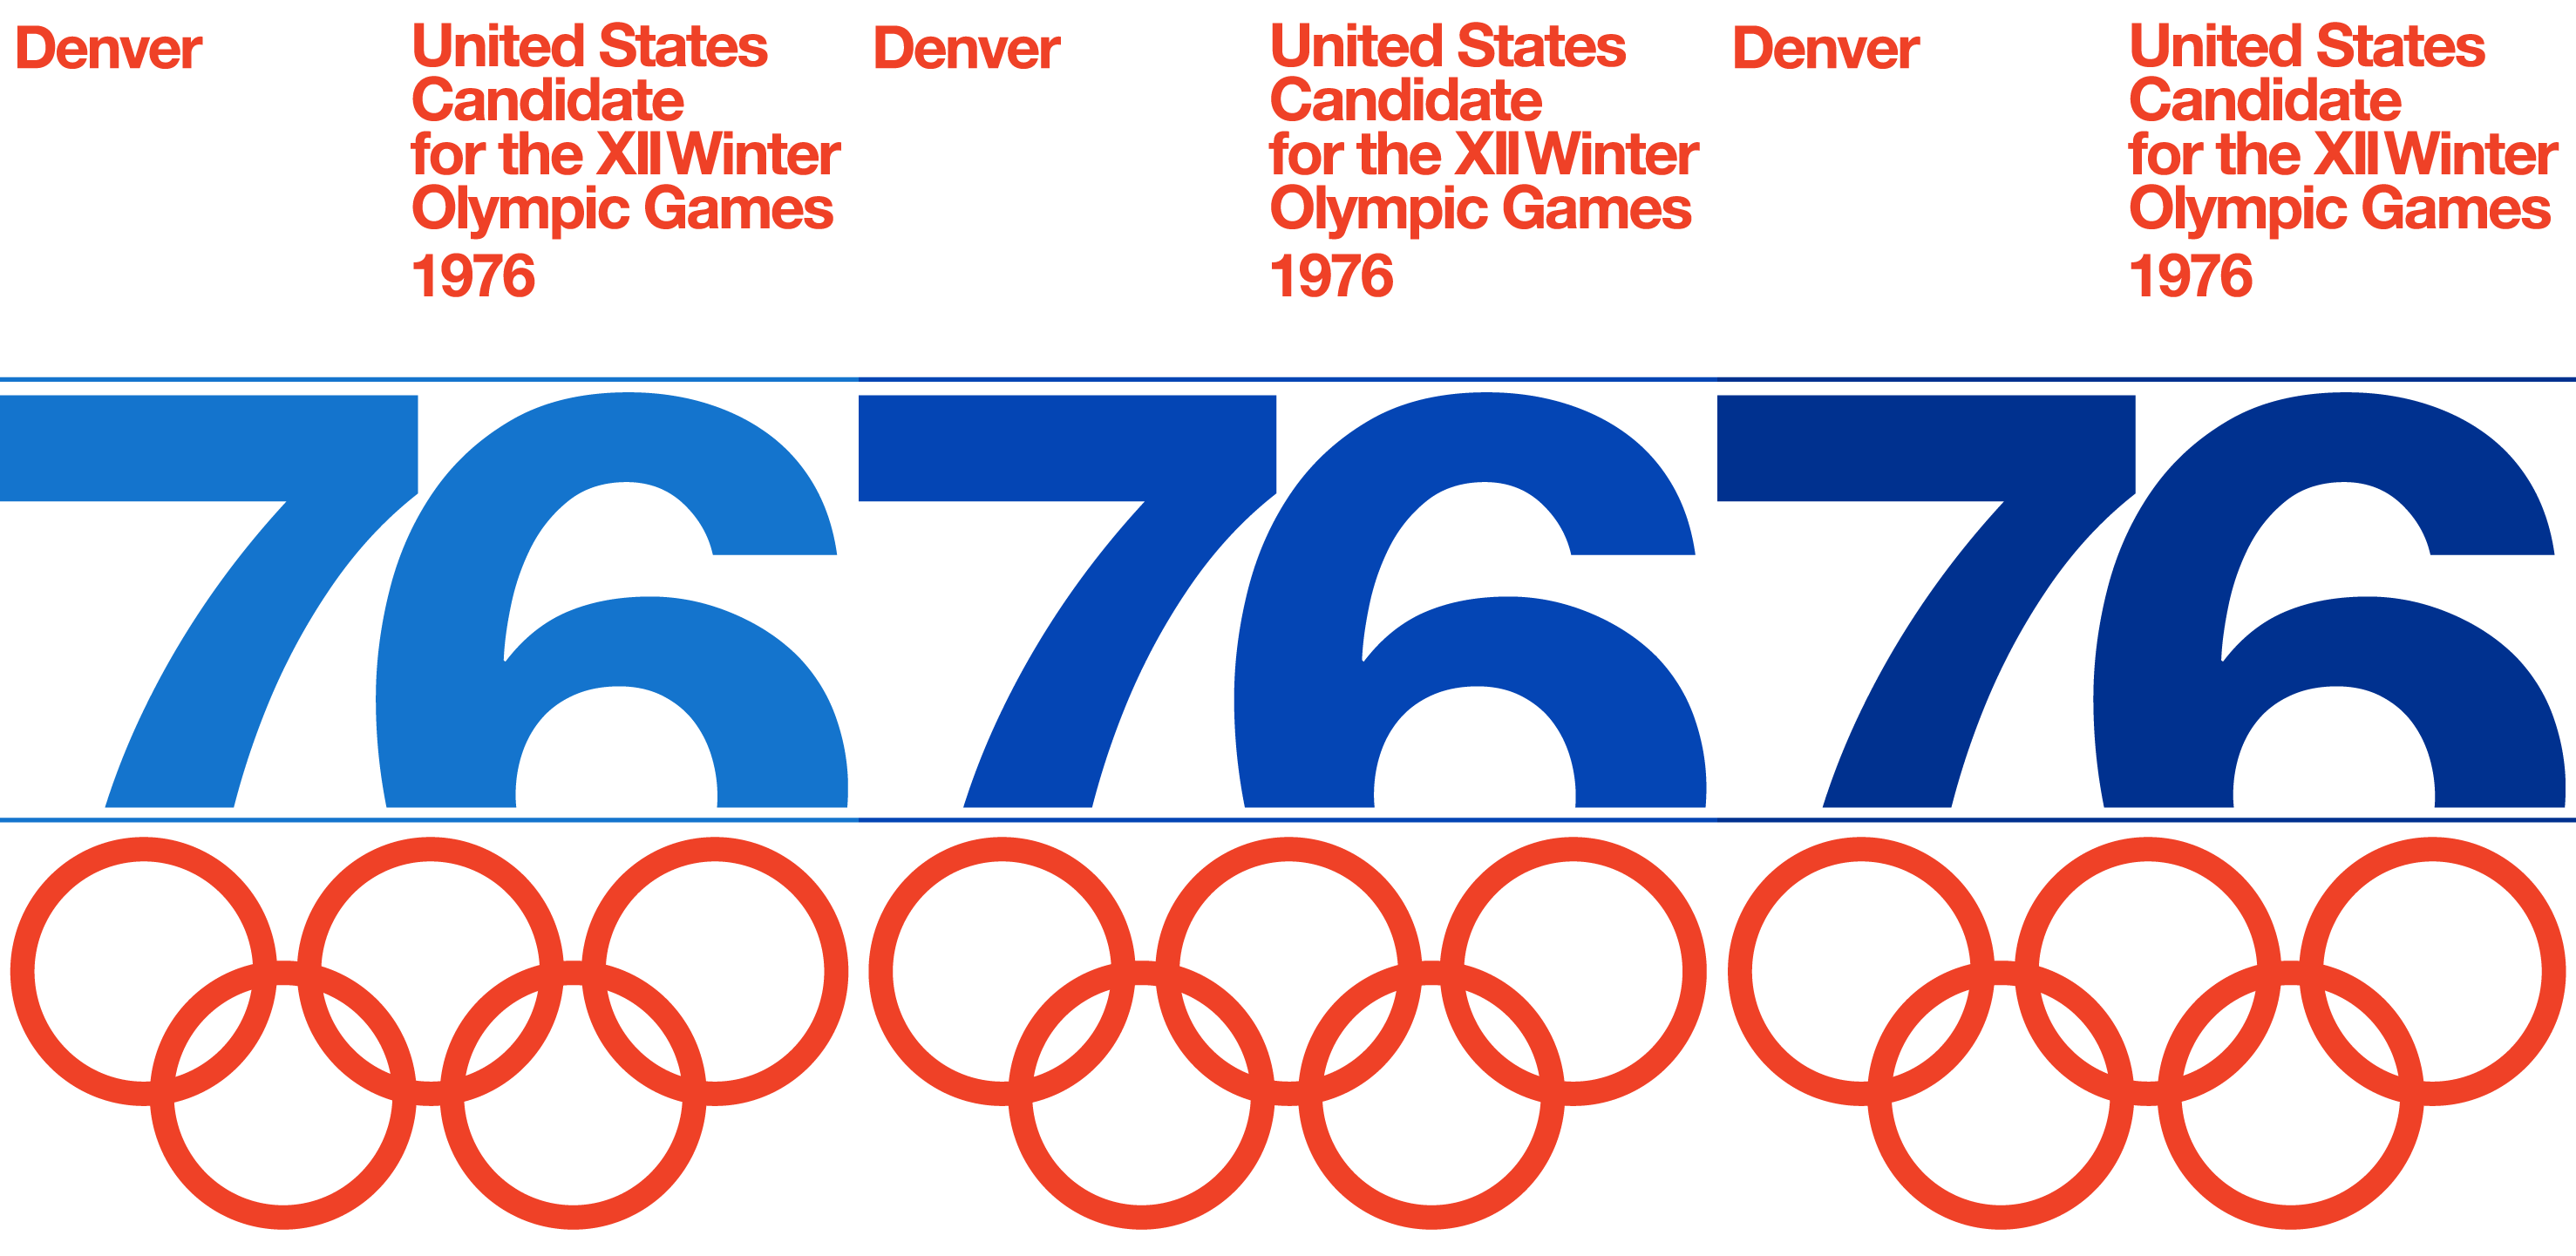 The Denver 76 poster: but which blue is right? I’ve seen all three shades used.